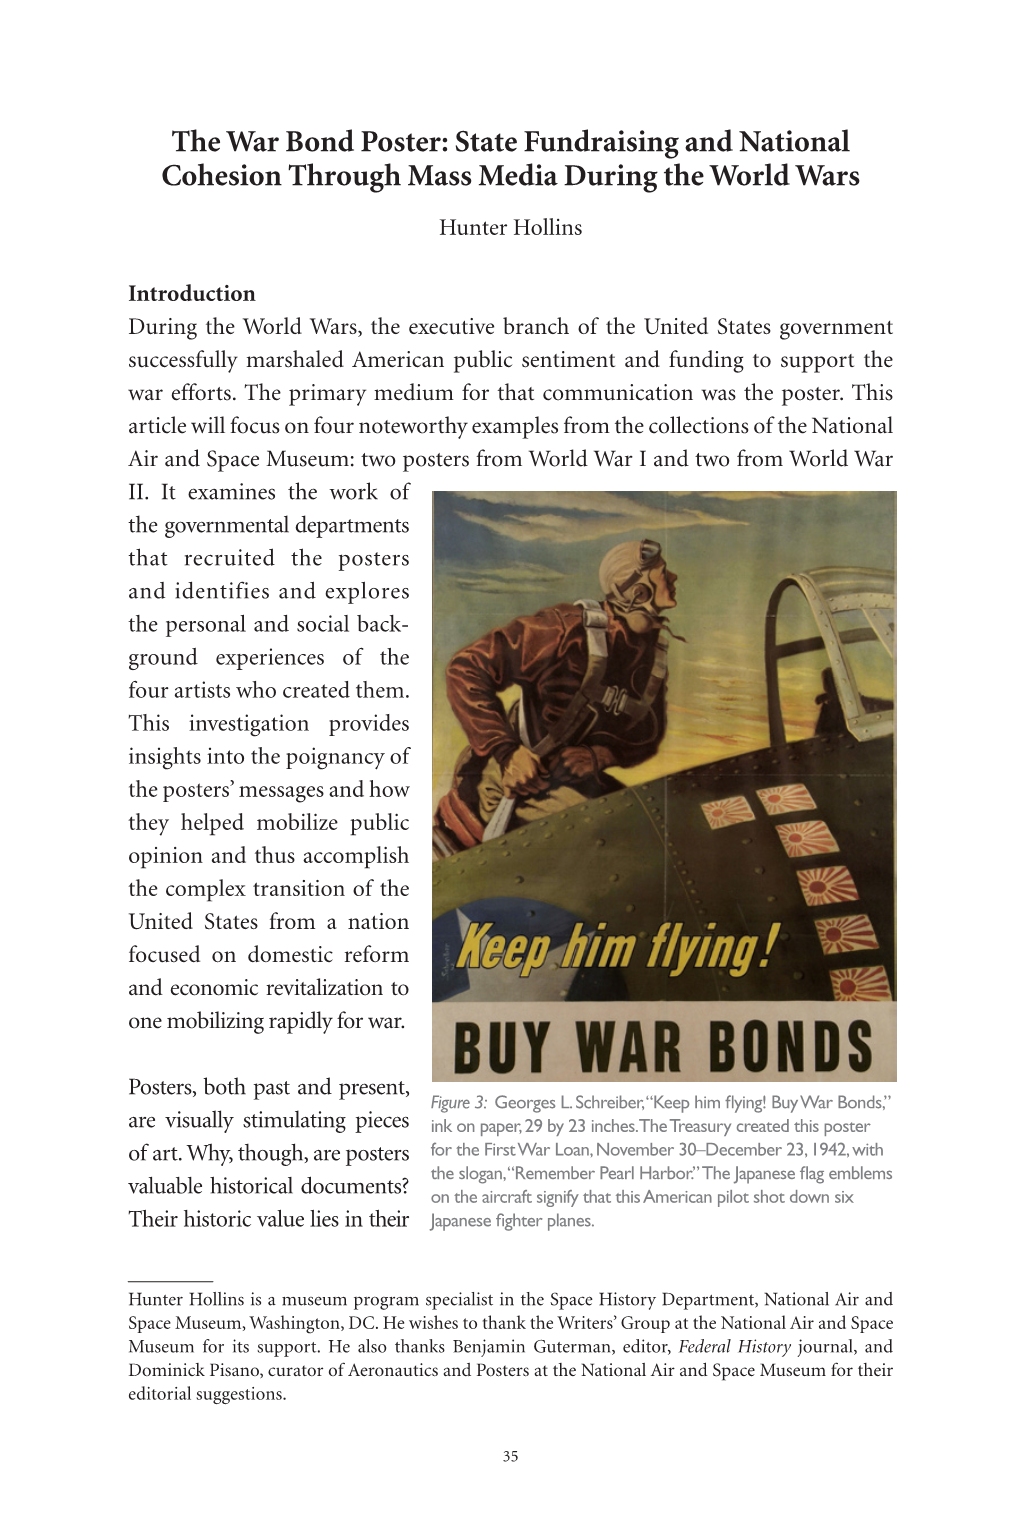 The War Bond Poster: State Fundraising and National Cohesion Through Mass Media During the World Wars